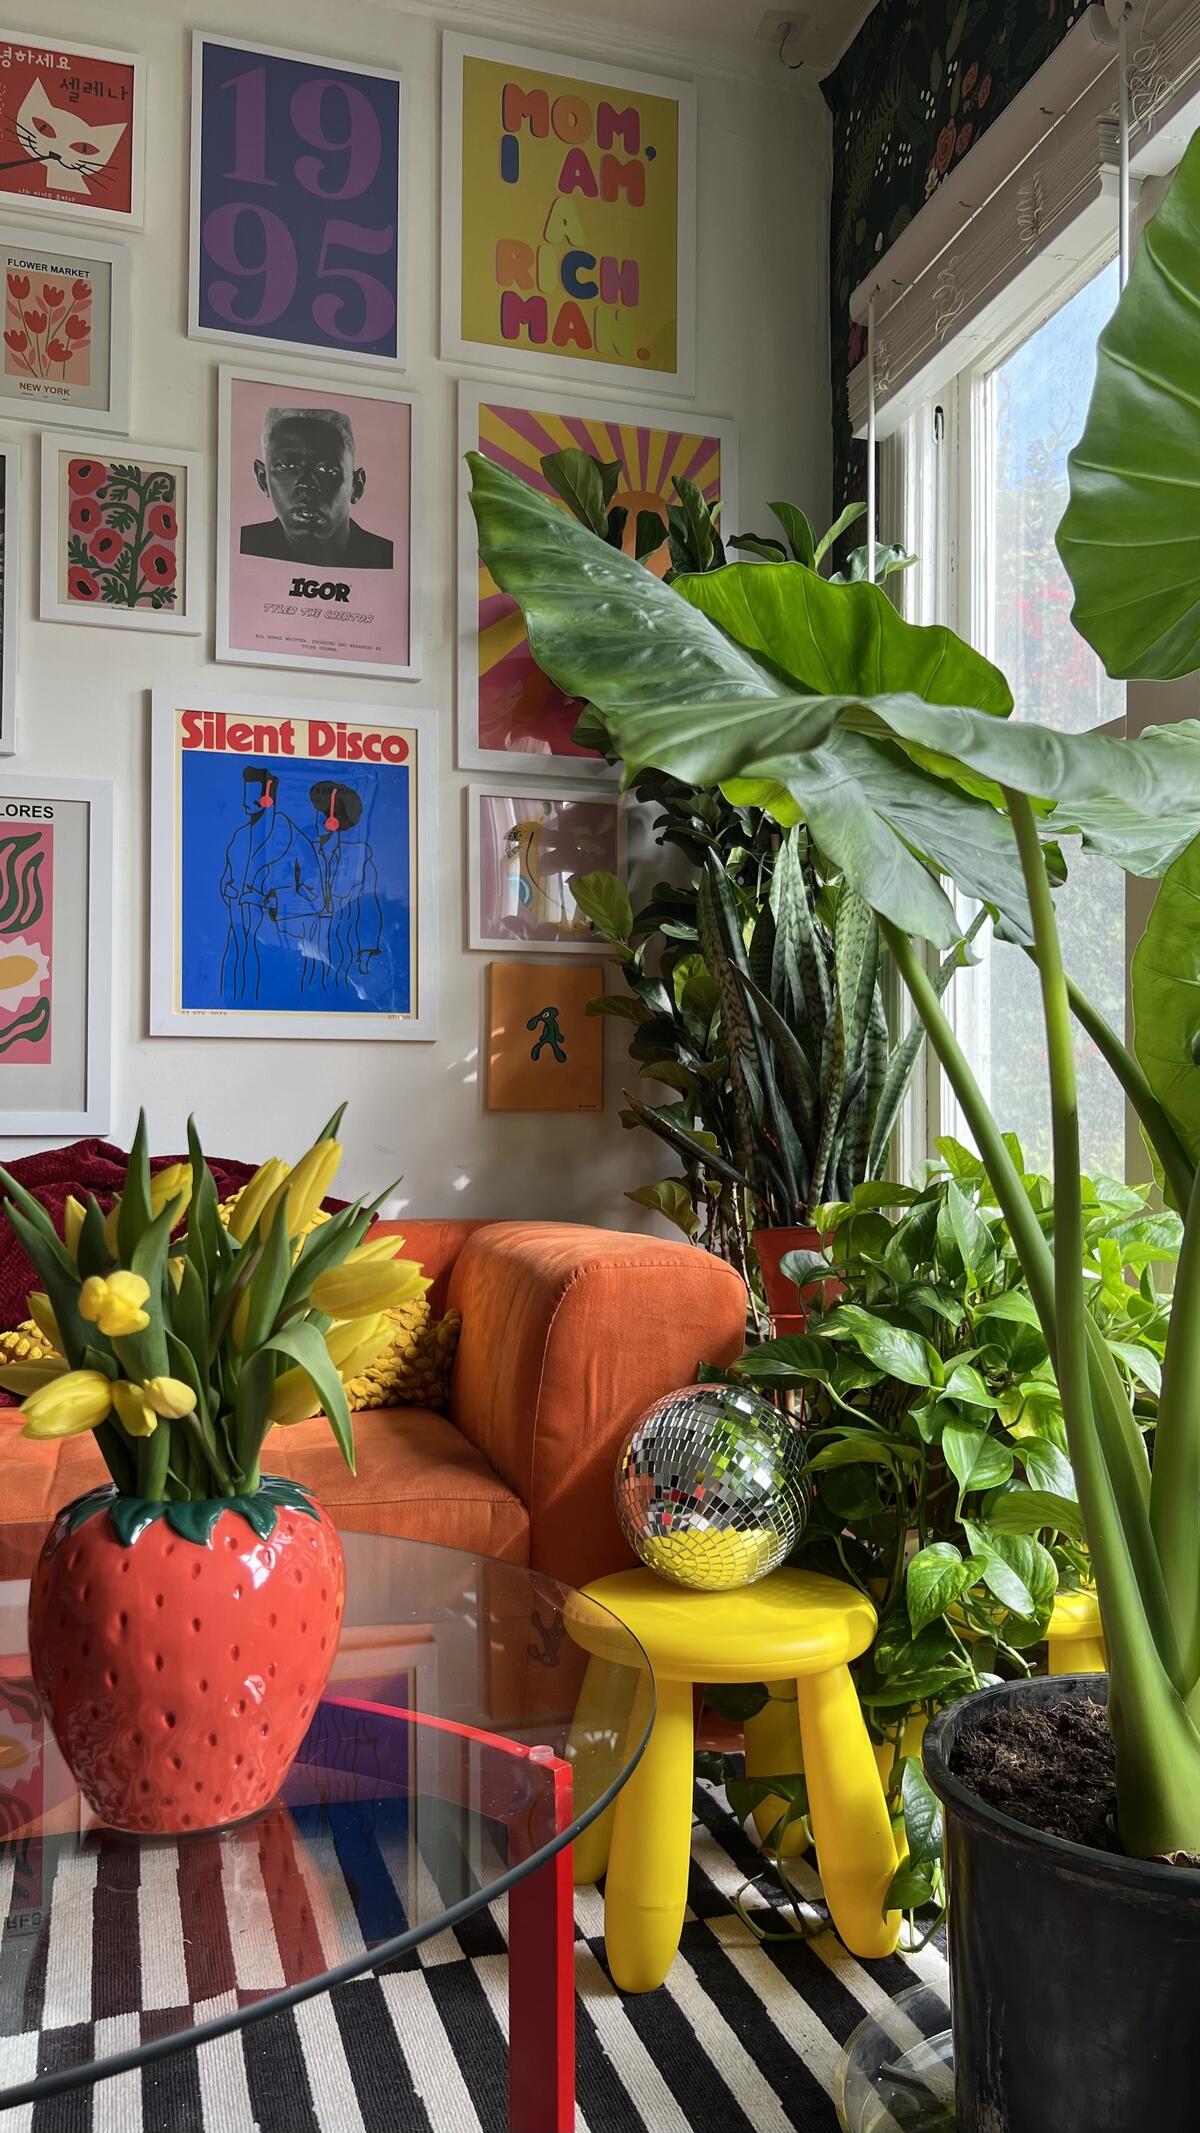 A colorful corner of Browning’s home boasting an orange couch and colorful gallery wall